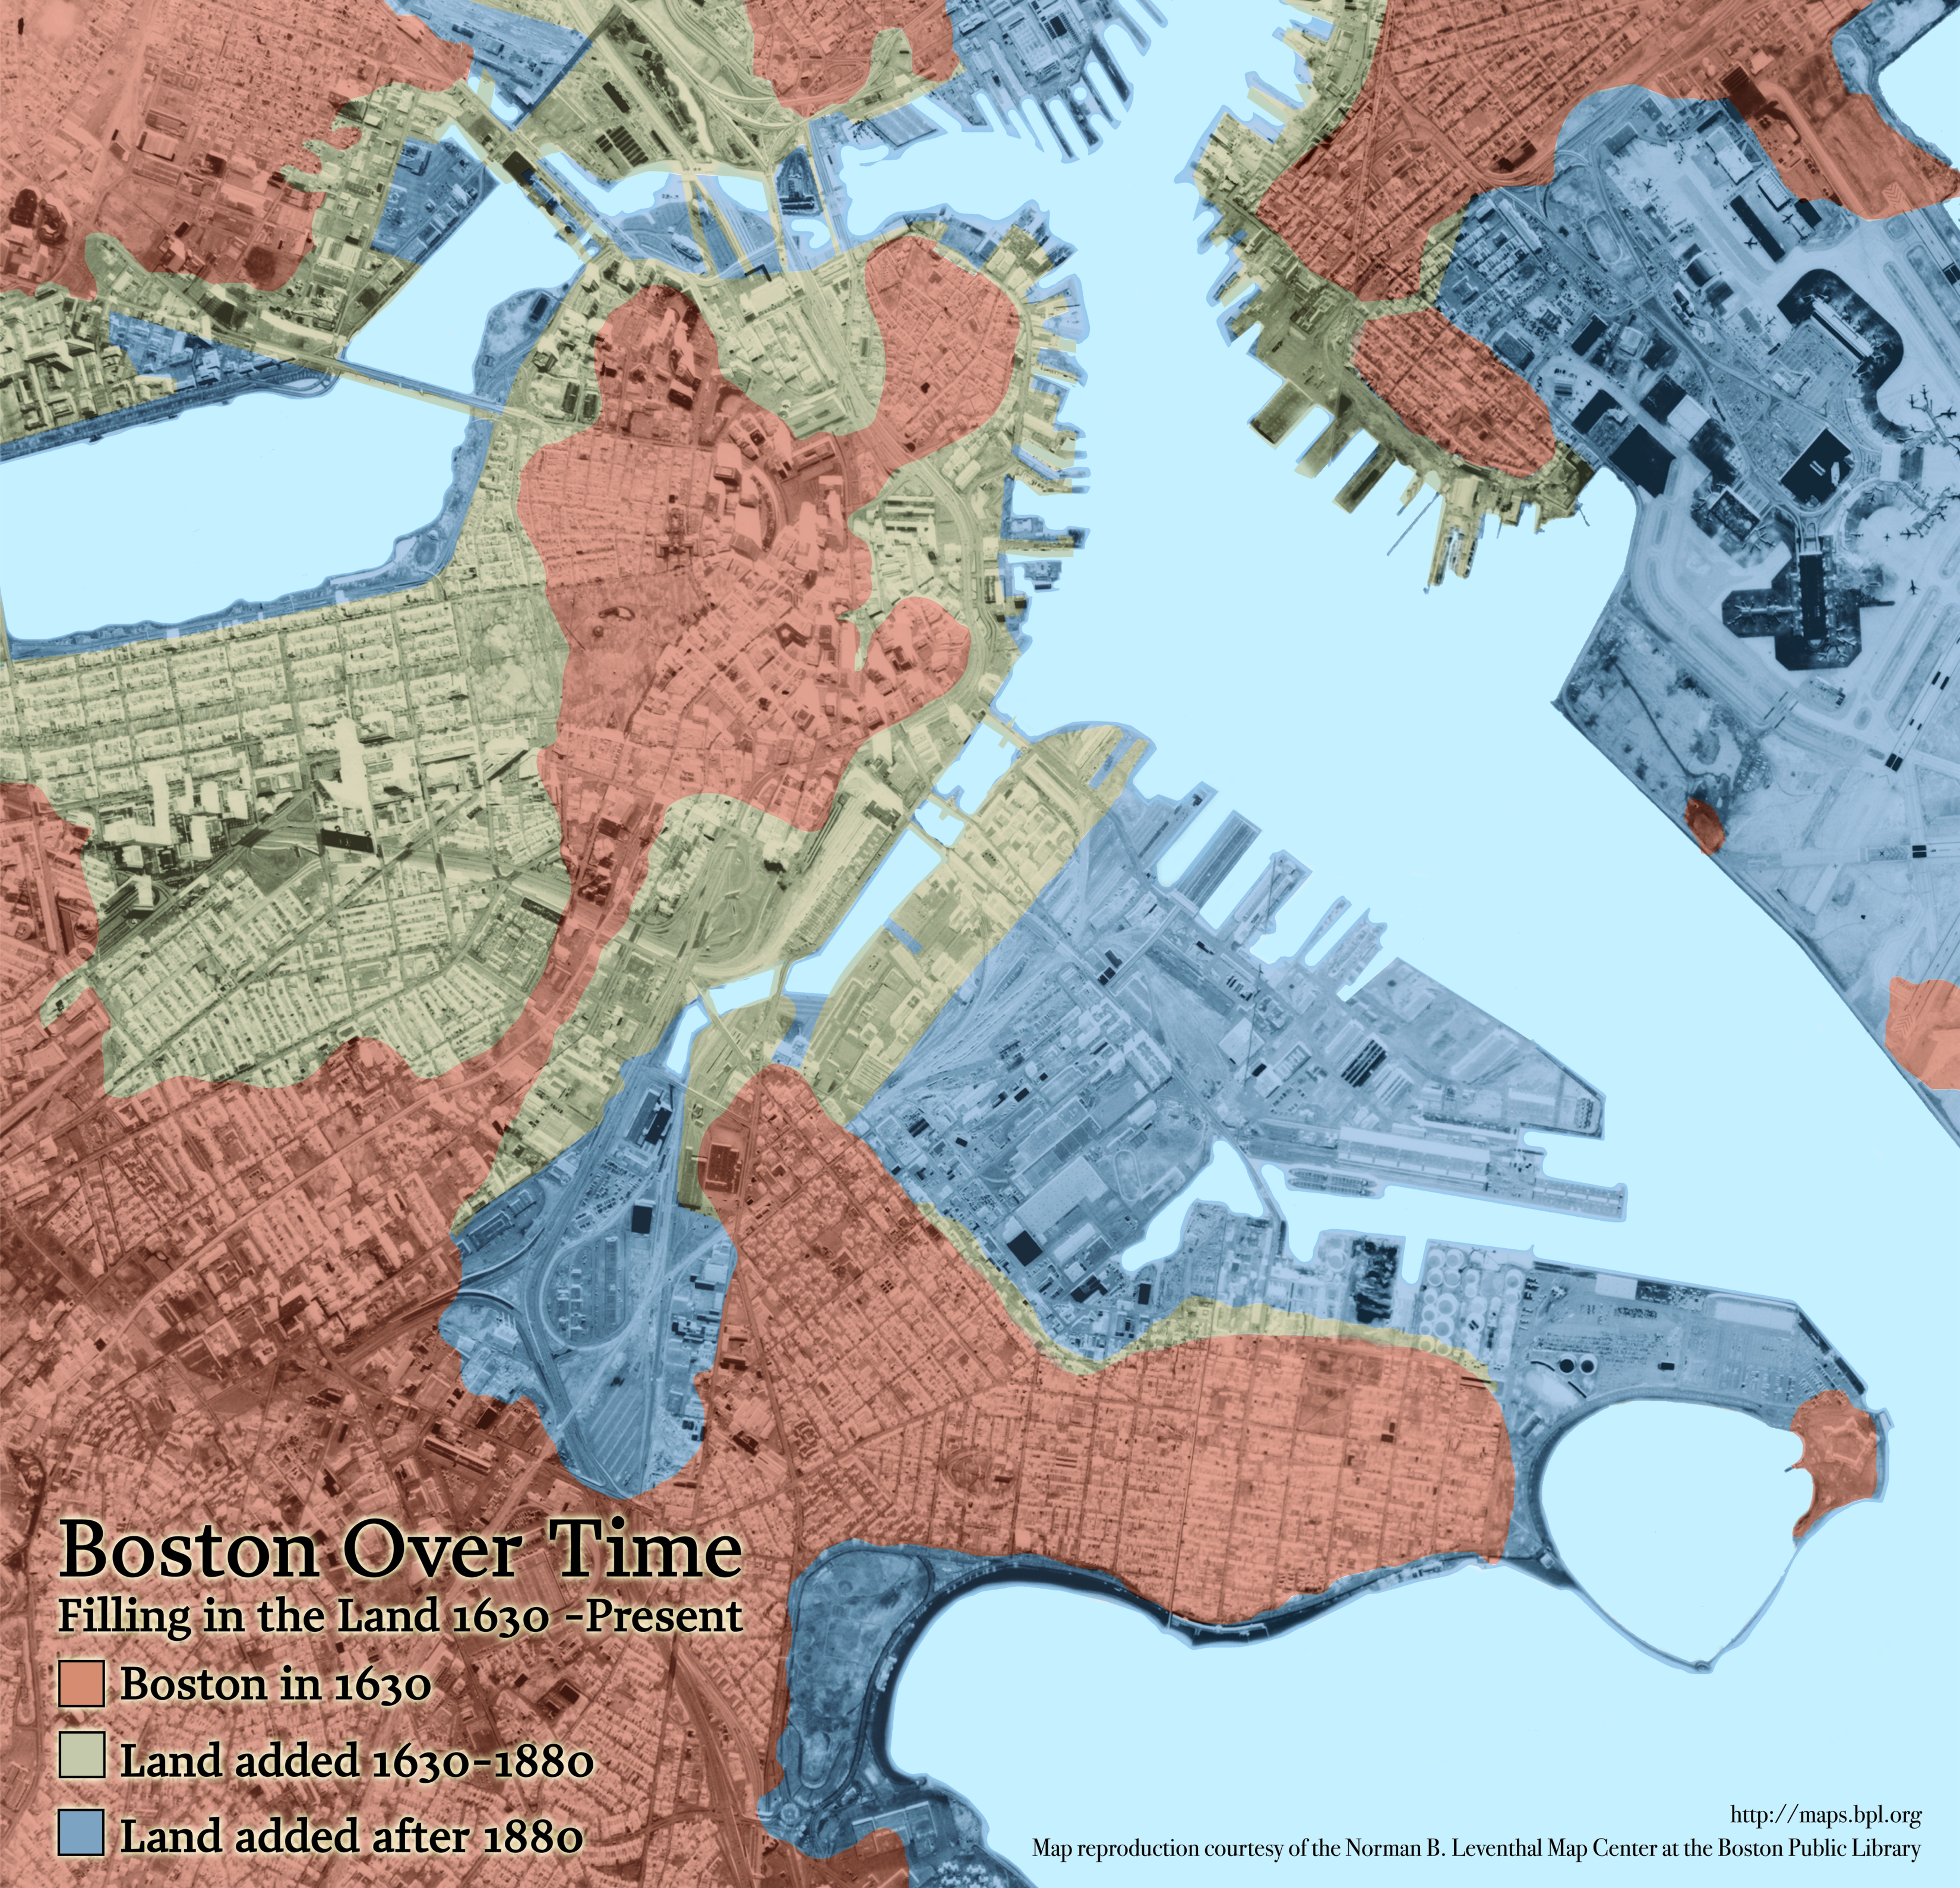 This modern map illustrates the various land making projects that have shaped Boston over the past three centuries.